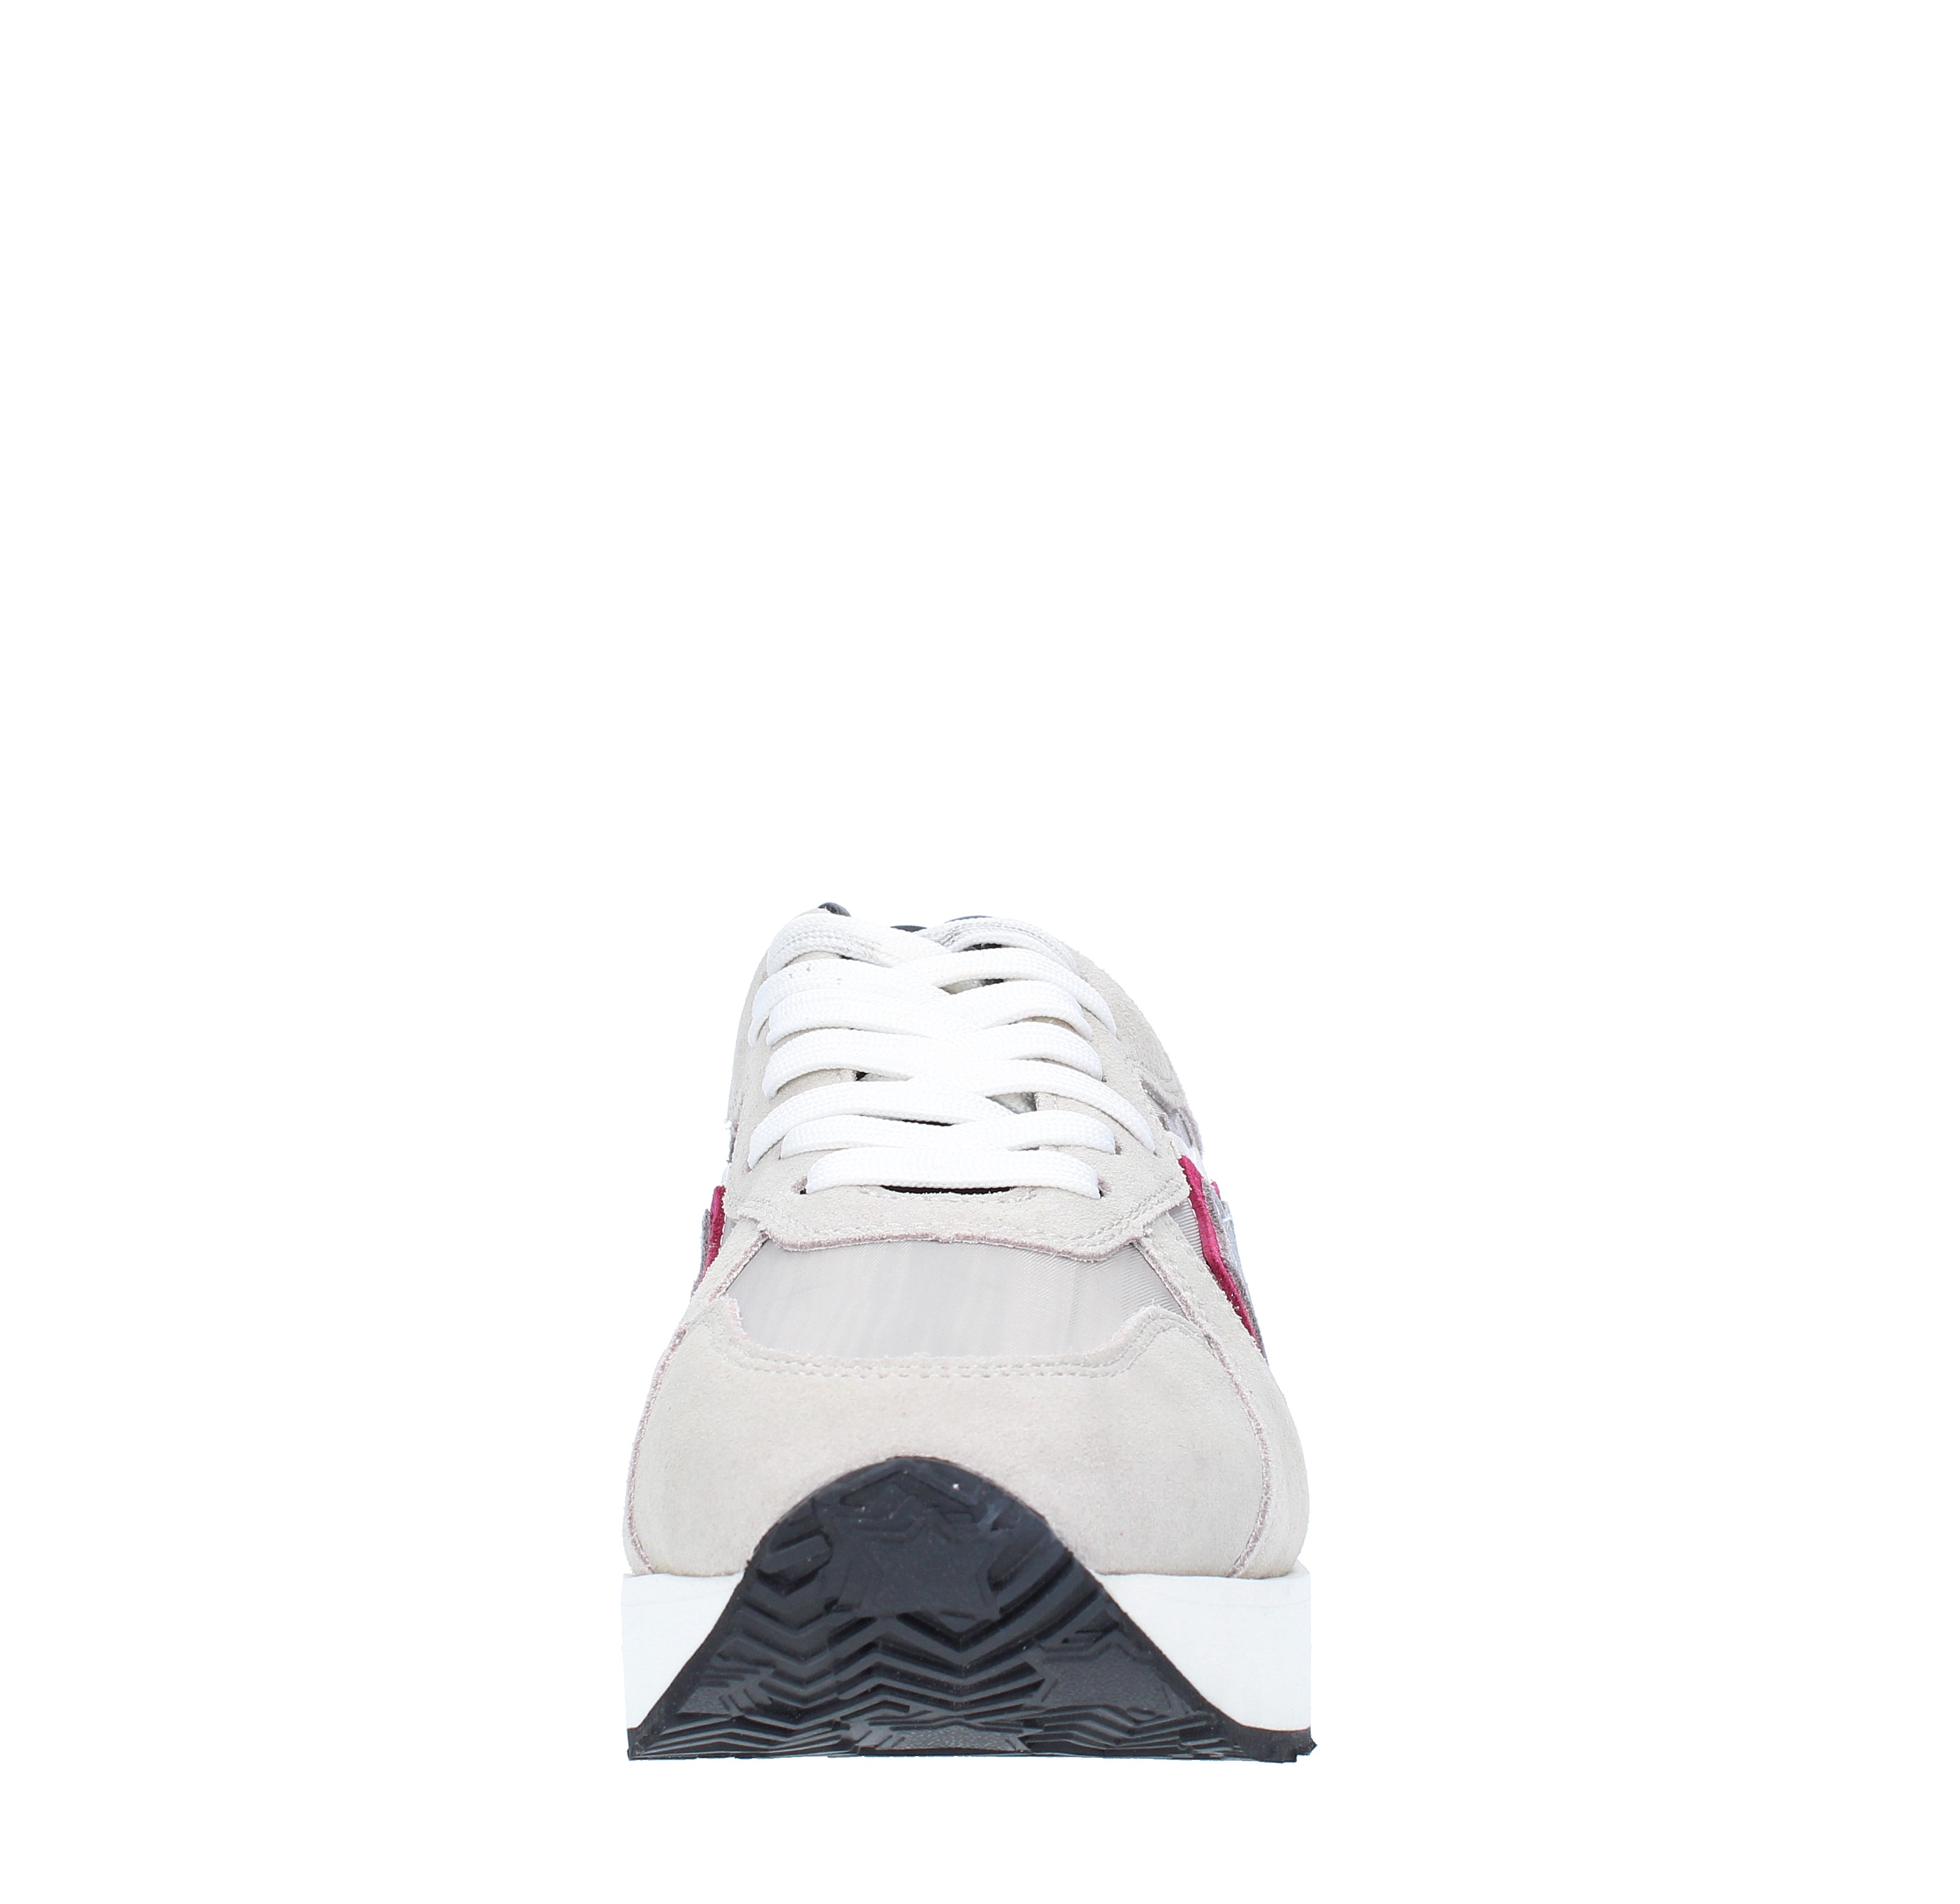 Trainers model ANDRC GGGM LSNR in suede and fabric ATLANTIC STARS | ANDRC GGGM LSNRBEIGE